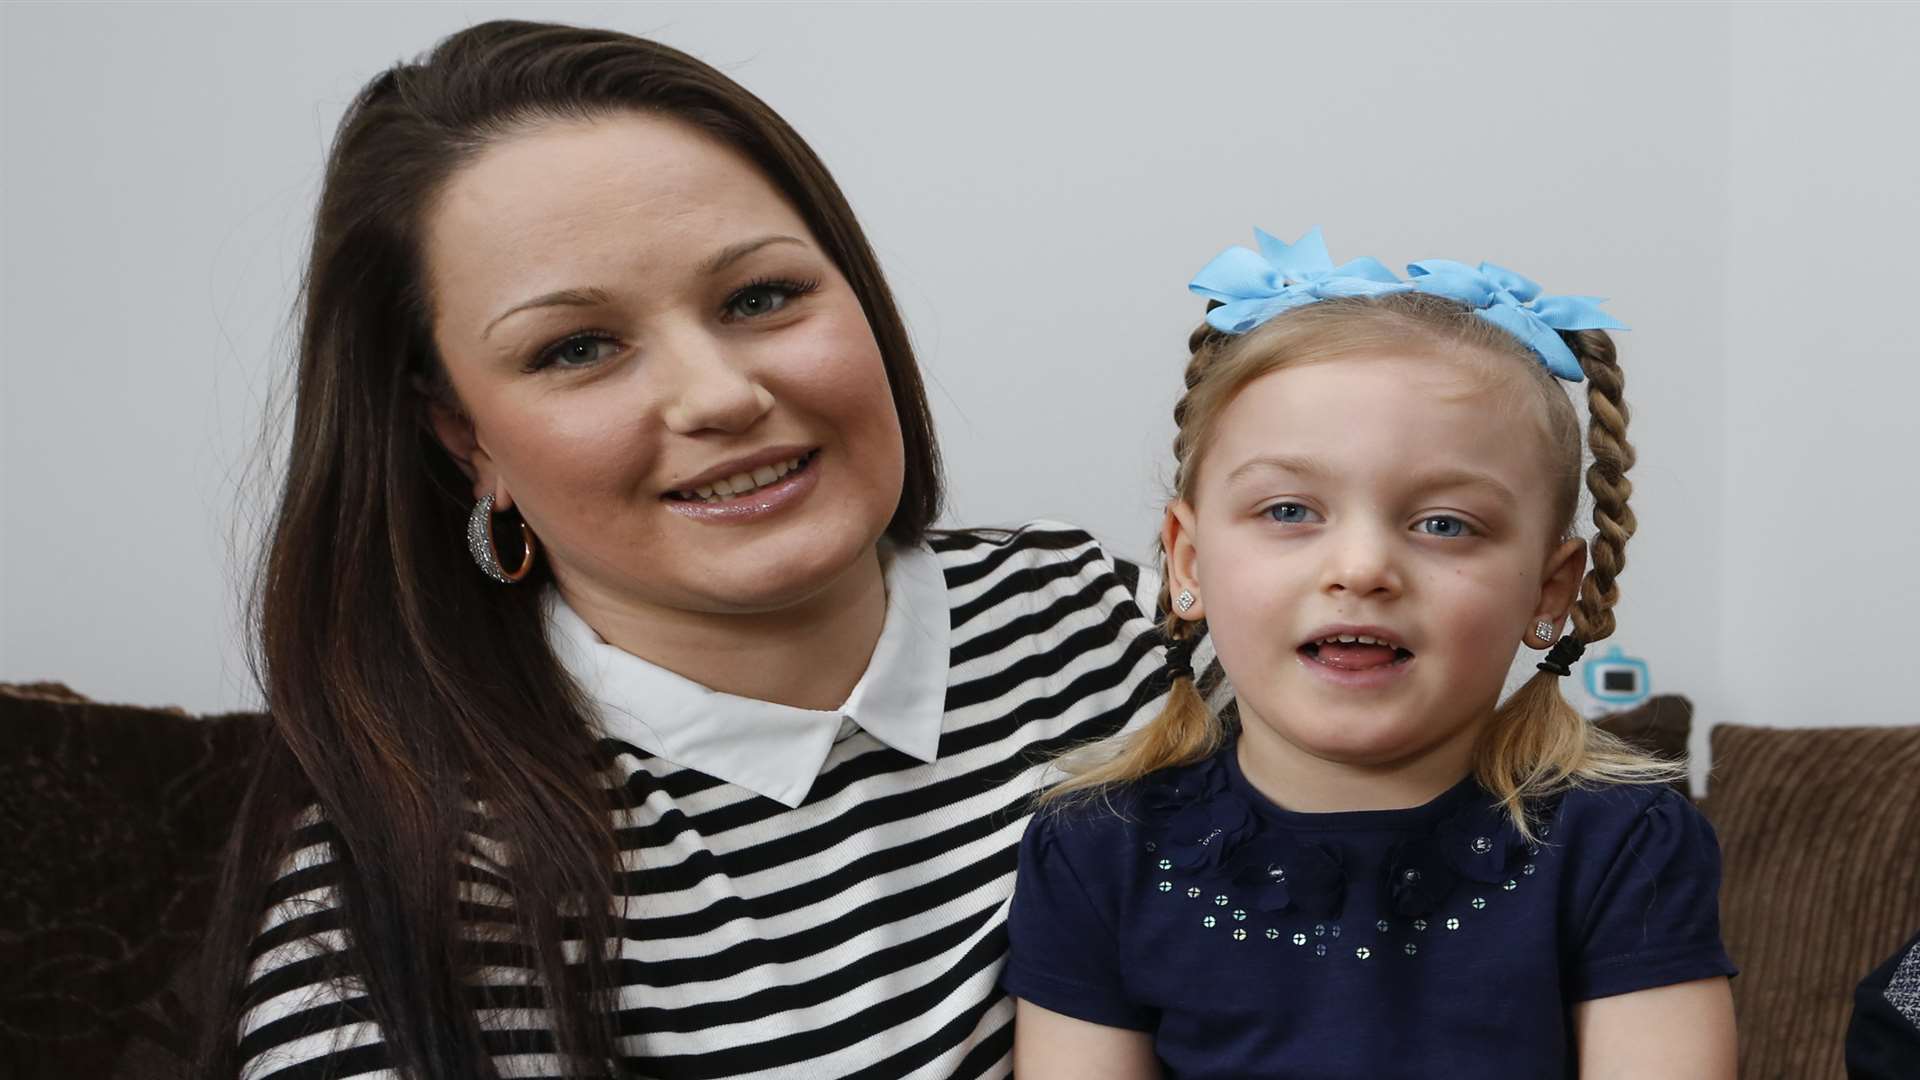 Kerry is fundraising for an operation to allow Lily to walk